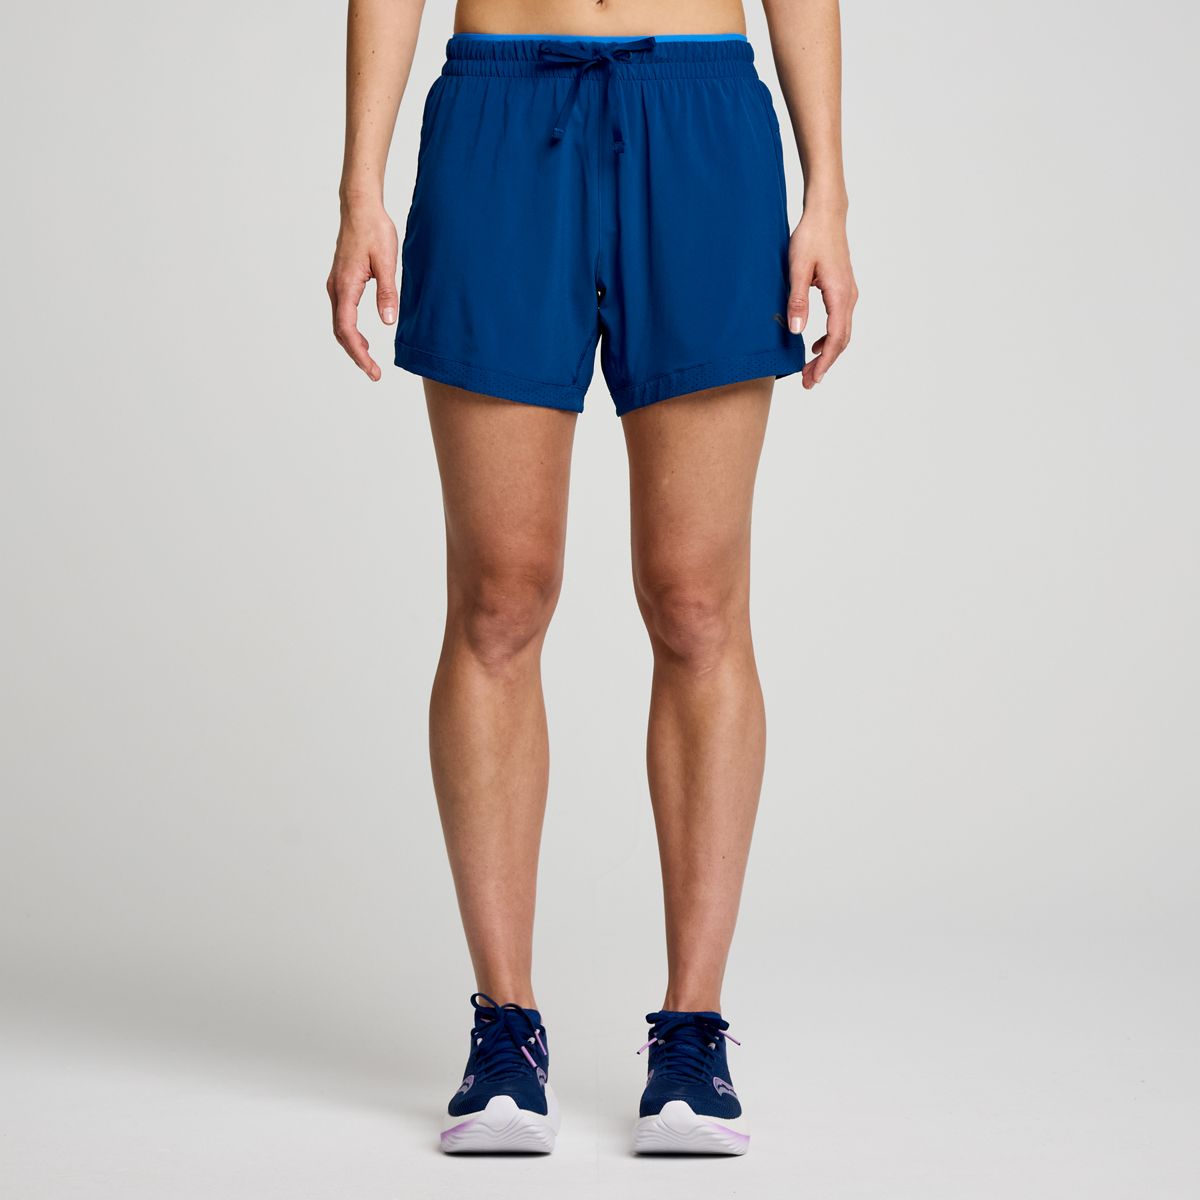 Women's Outpace 5 Short - View All